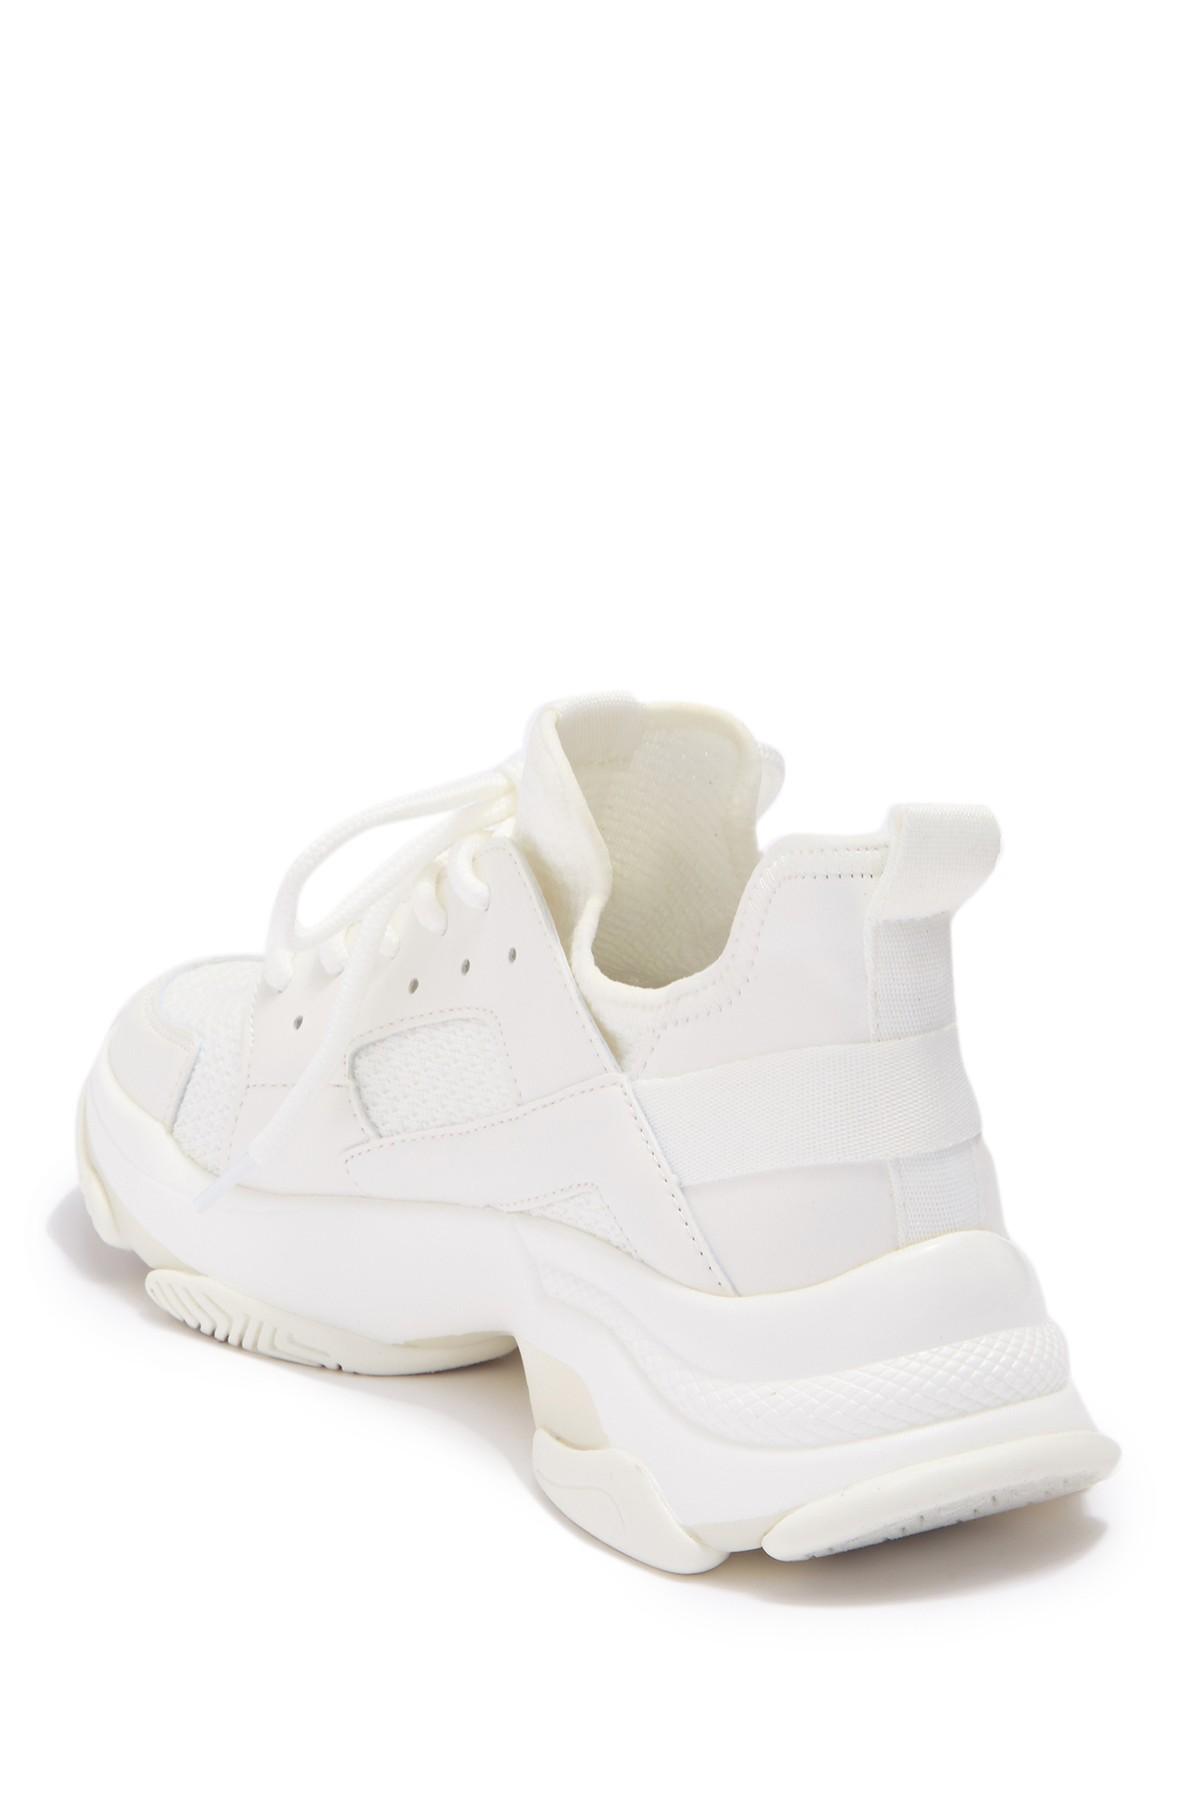 steve madden arelle exaggerated sole sneaker